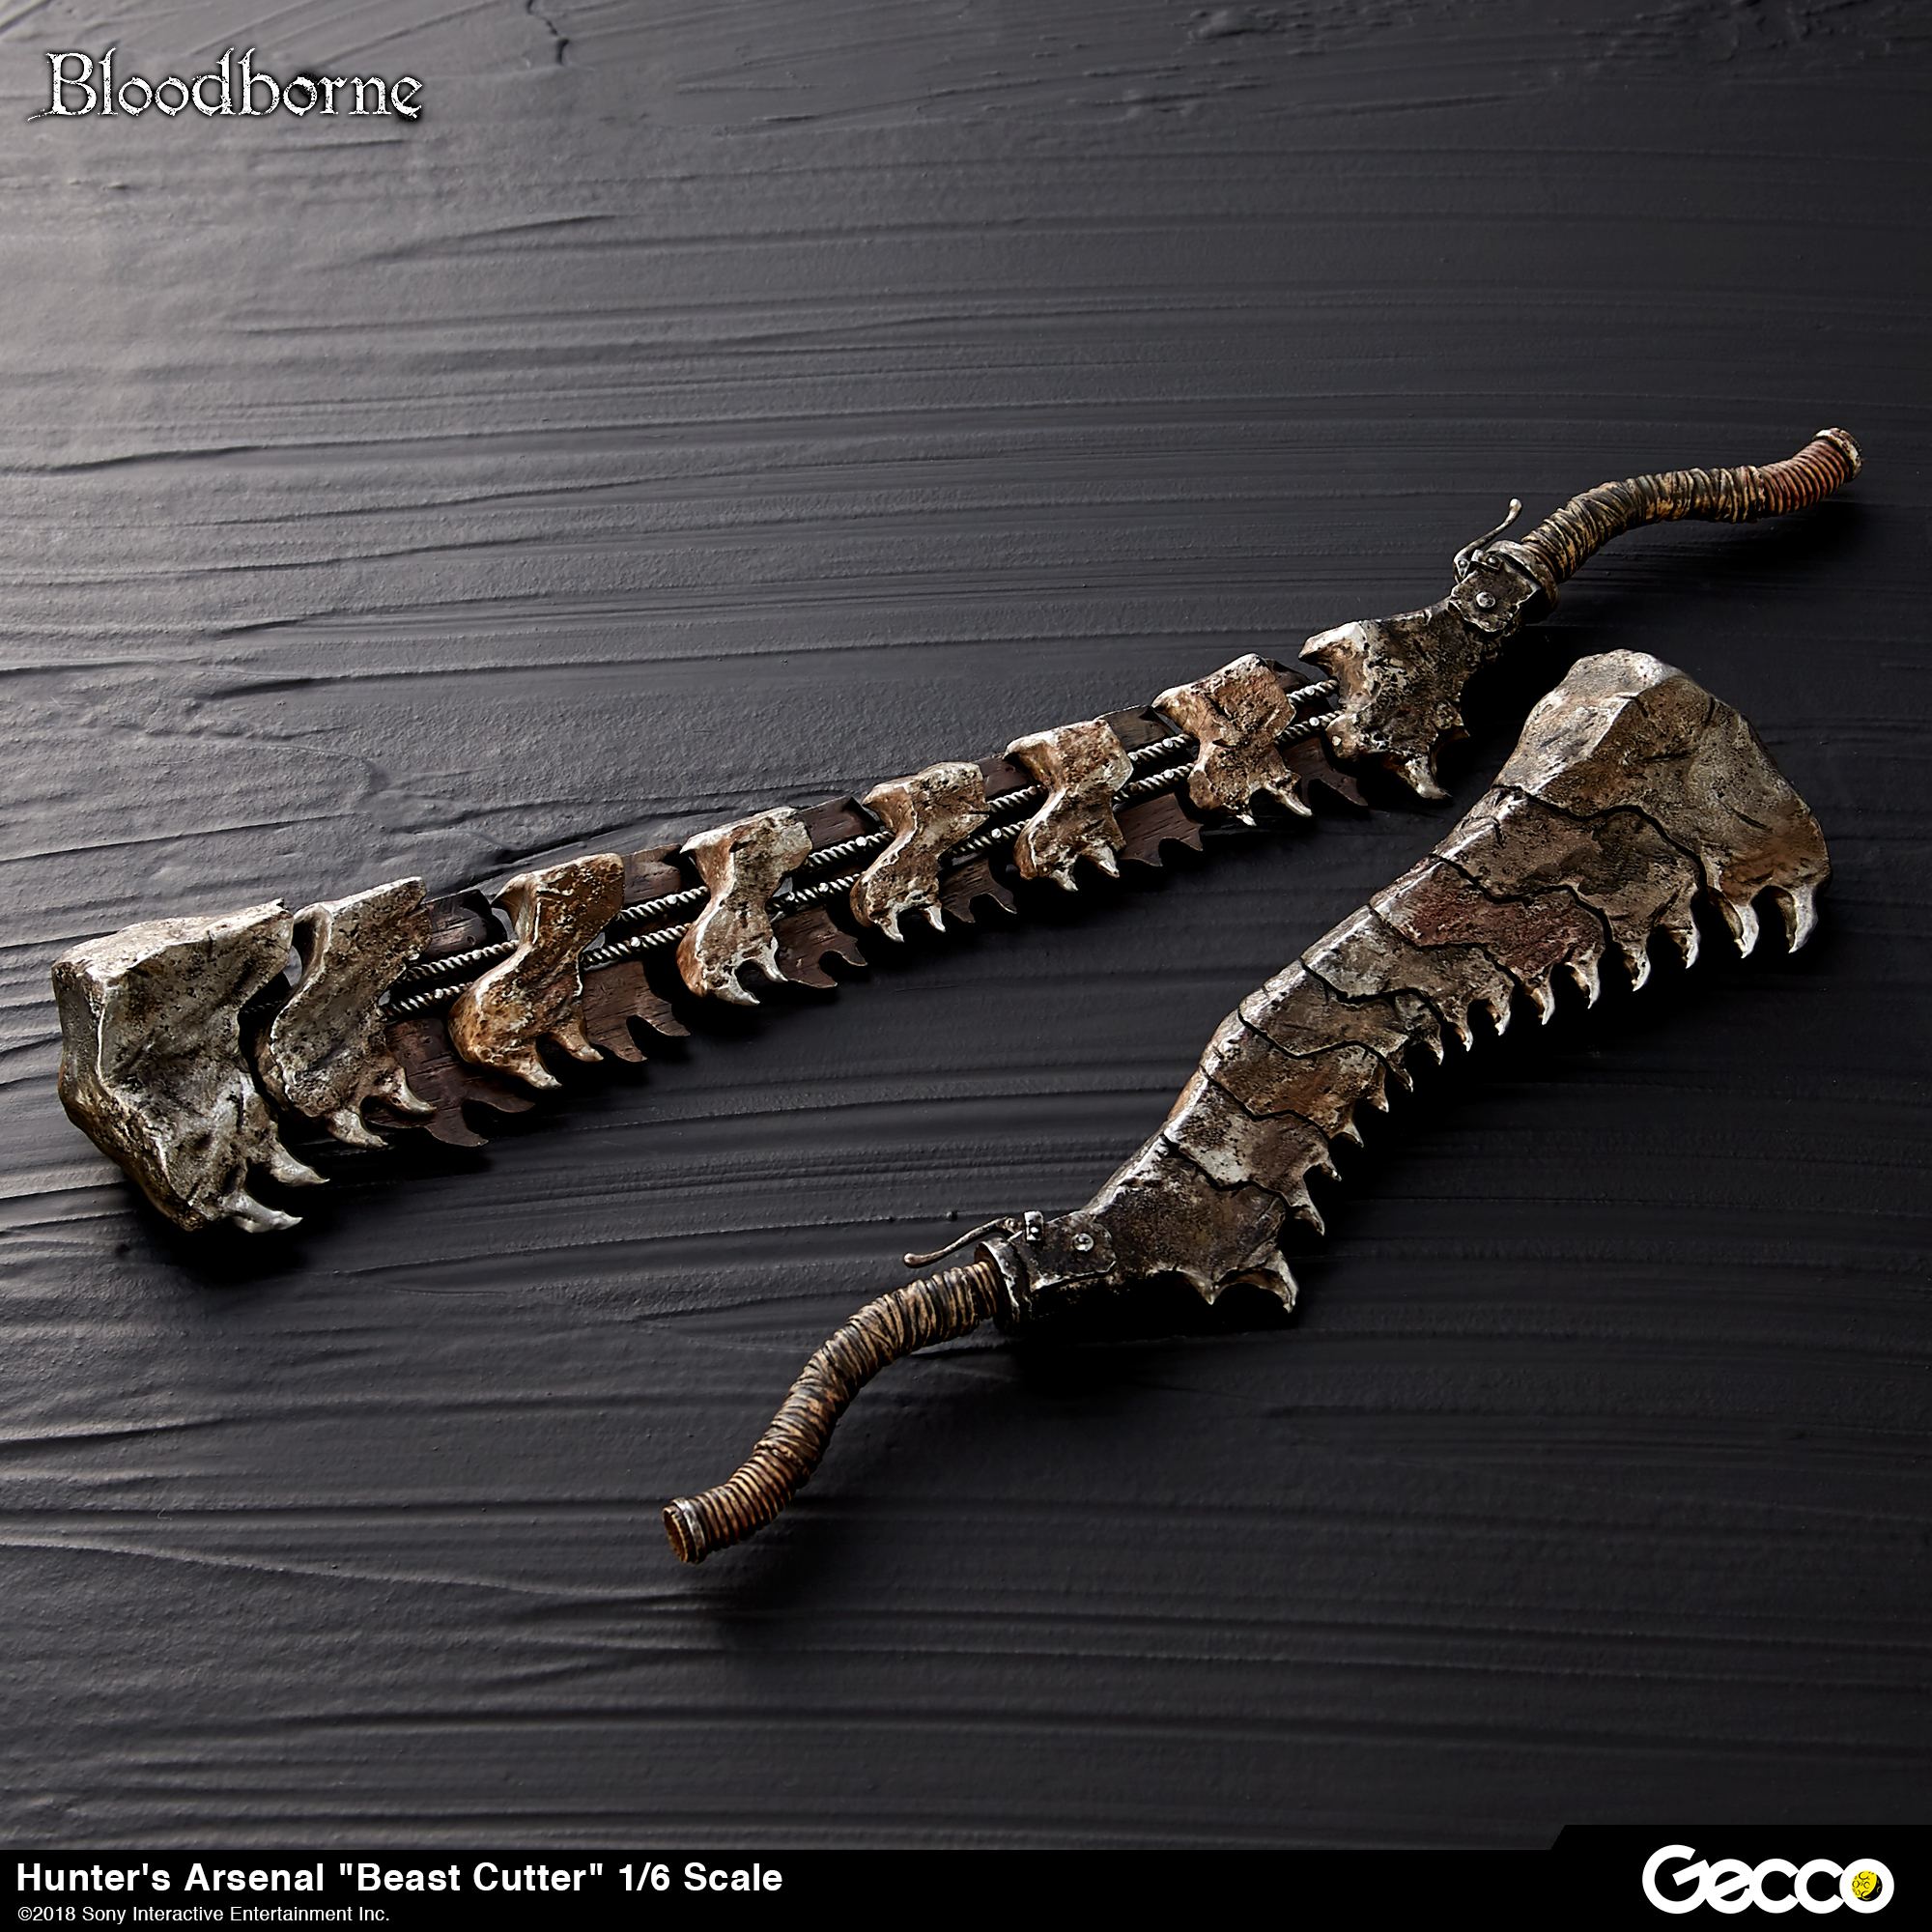 BLOODBORNE 1/6 SCALE WEAPON: HUNTER'S ARSENAL BEAST CUTTER Gecco